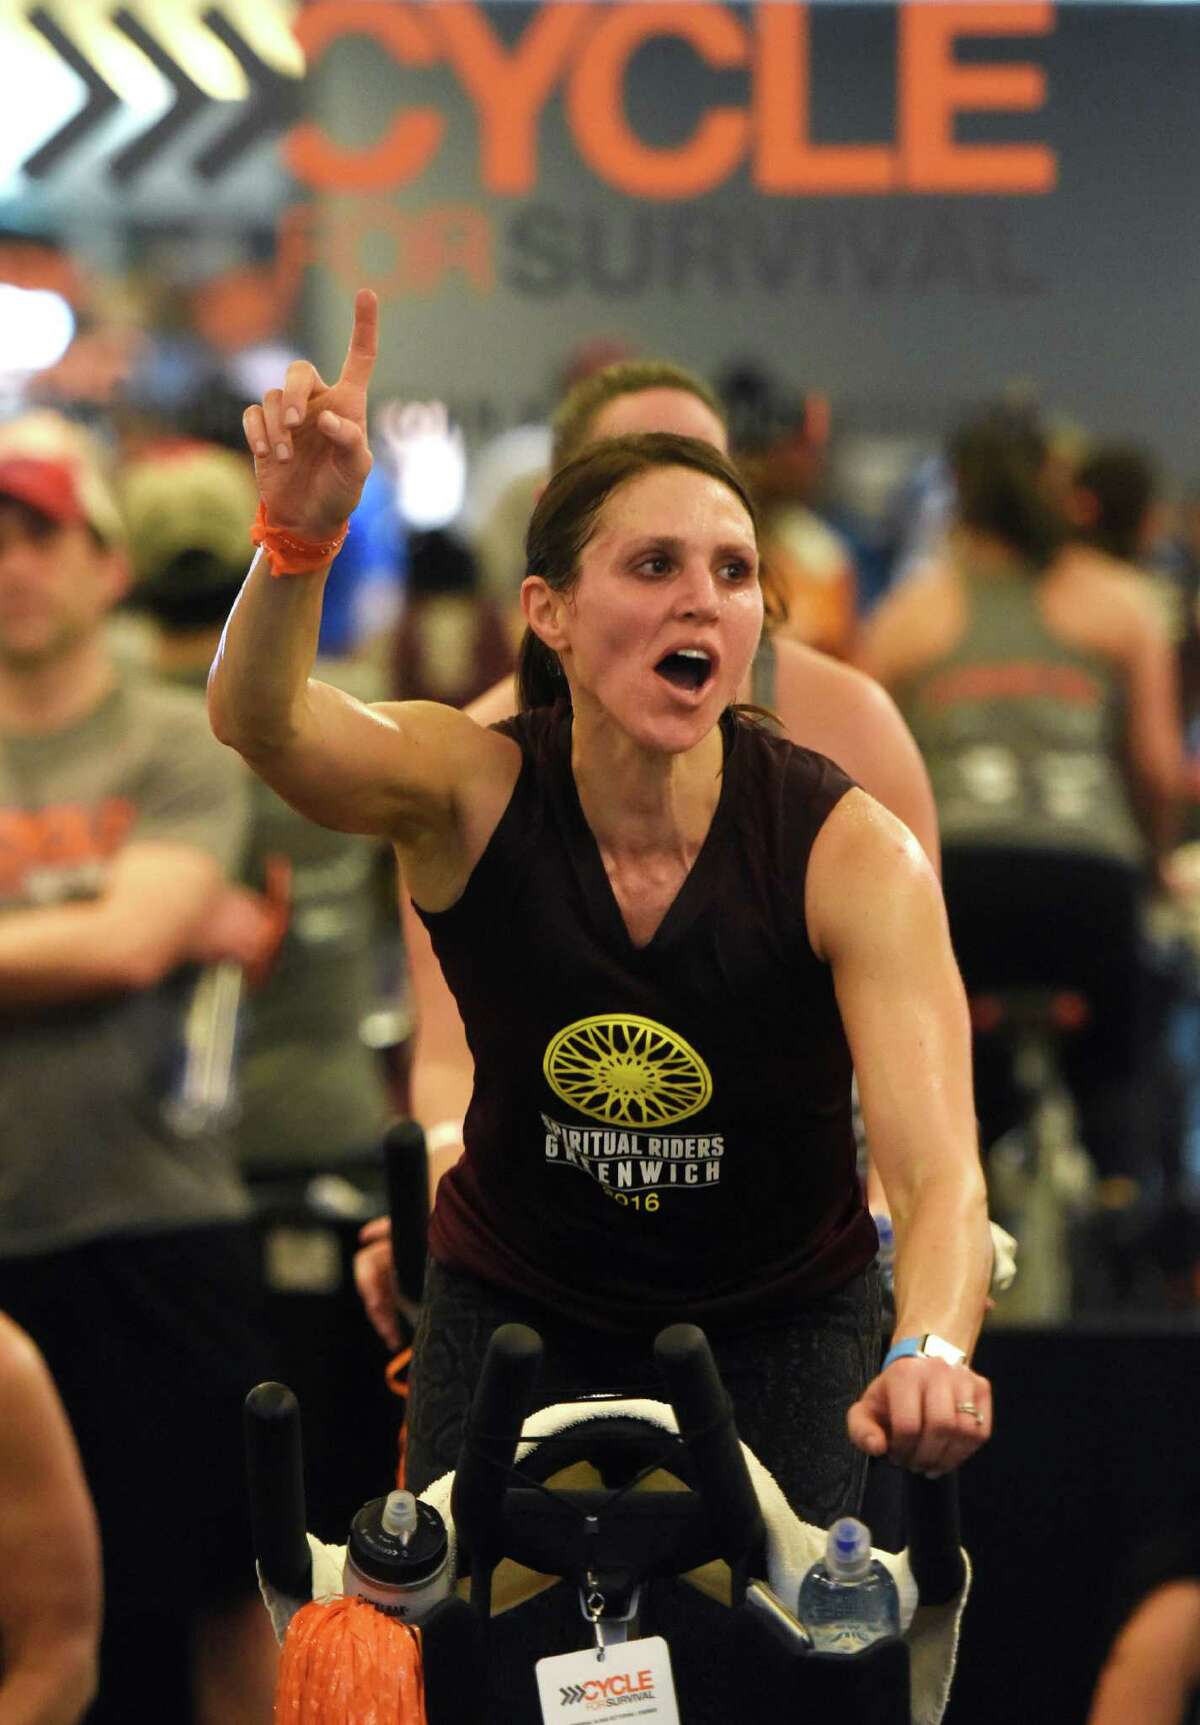 Lachmont, N.Y. resident Alexis Katz, of team Spiritual Riders, rides during the Cycle for Survival indoor cycling fundraiser at Equinox in Greenwich, Conn. Sunday, Feb. 21, 2016. Cycle for Survival, owned and operated by Memorial Sloan Kettering, is a fundraiser with the goal to beat rare cancers by raising money through a series of indoor cycling events across the country. 2016 marks the tenth year of rides and the event has raised over $90 million since 2007. More than 800 riders participated at the event in Greenwich Sunday and the Spiritual Riders team led the way raising more than $140,000 alone.